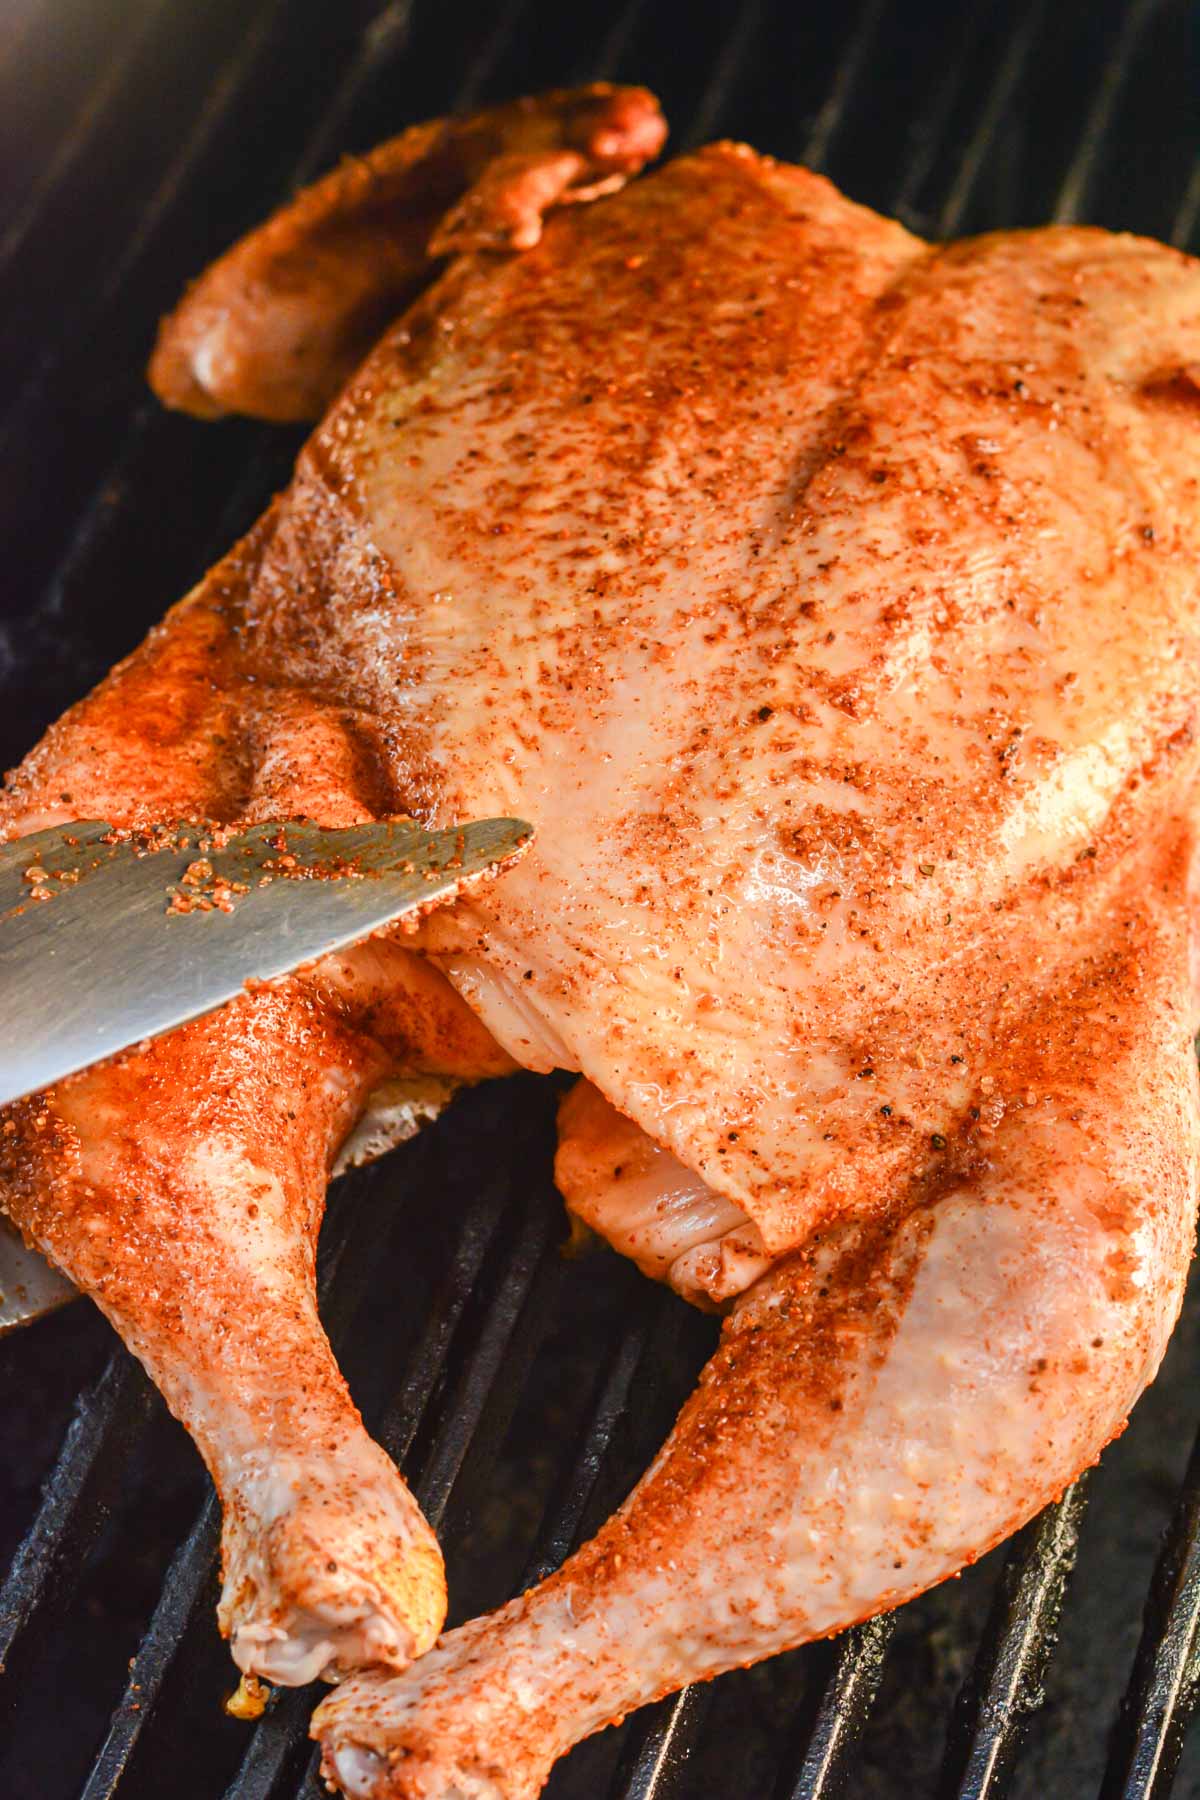 placing the seasoned chicken on the grill using BBQ tongs.